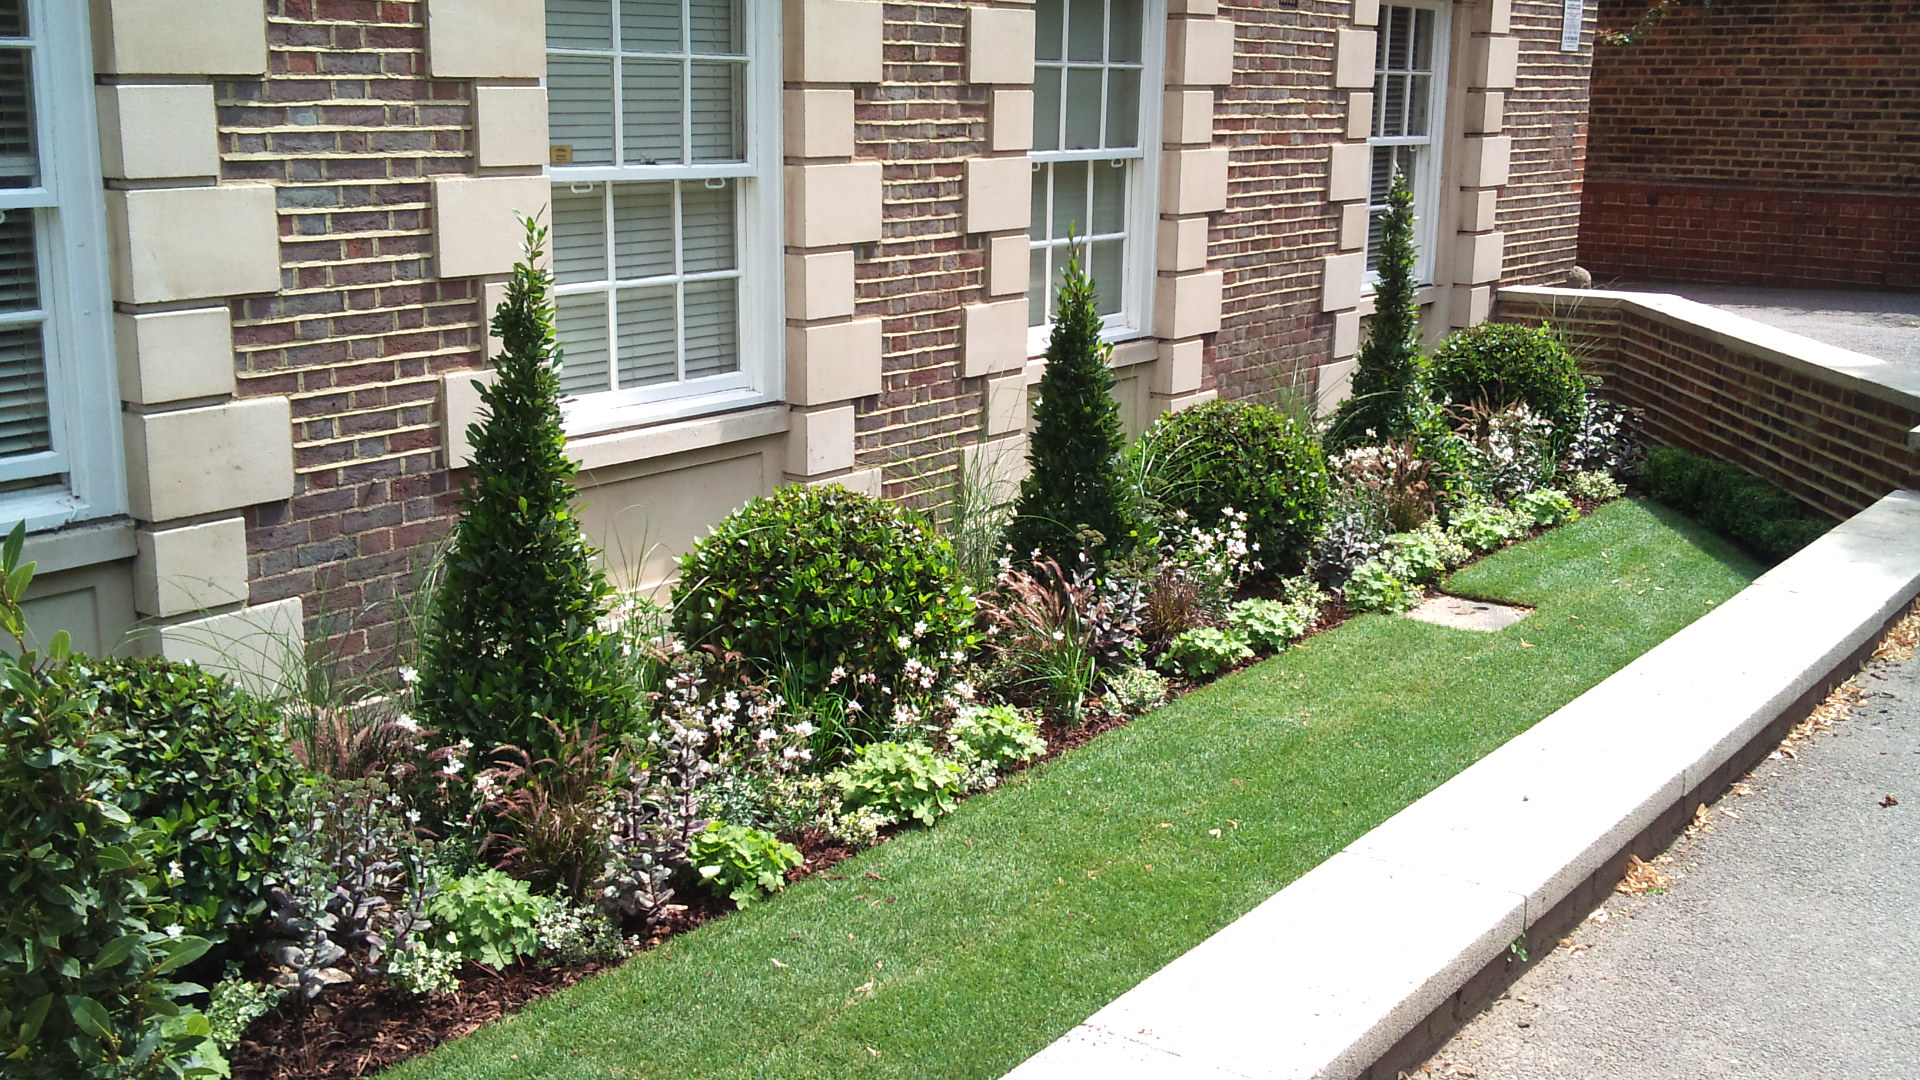 Abbey road frontage planting with bay spires and new planting in front of narrow lawn